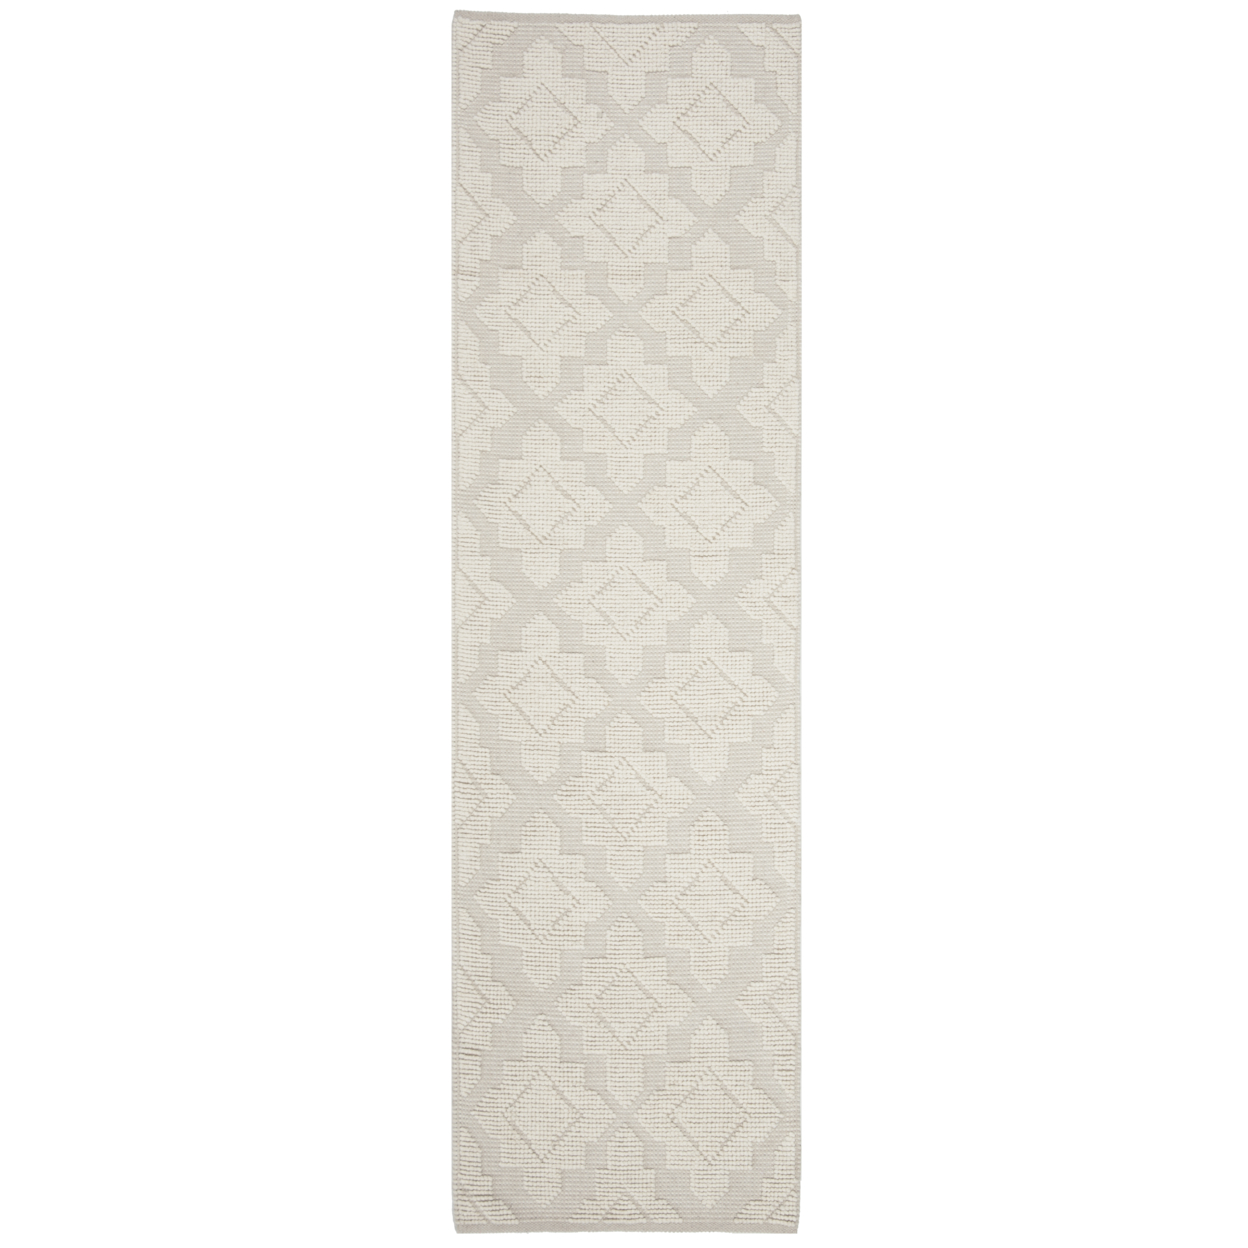 SAFAVIEH Vermont Collection VRM103A Handwoven Ivory Rug - 9 X 12